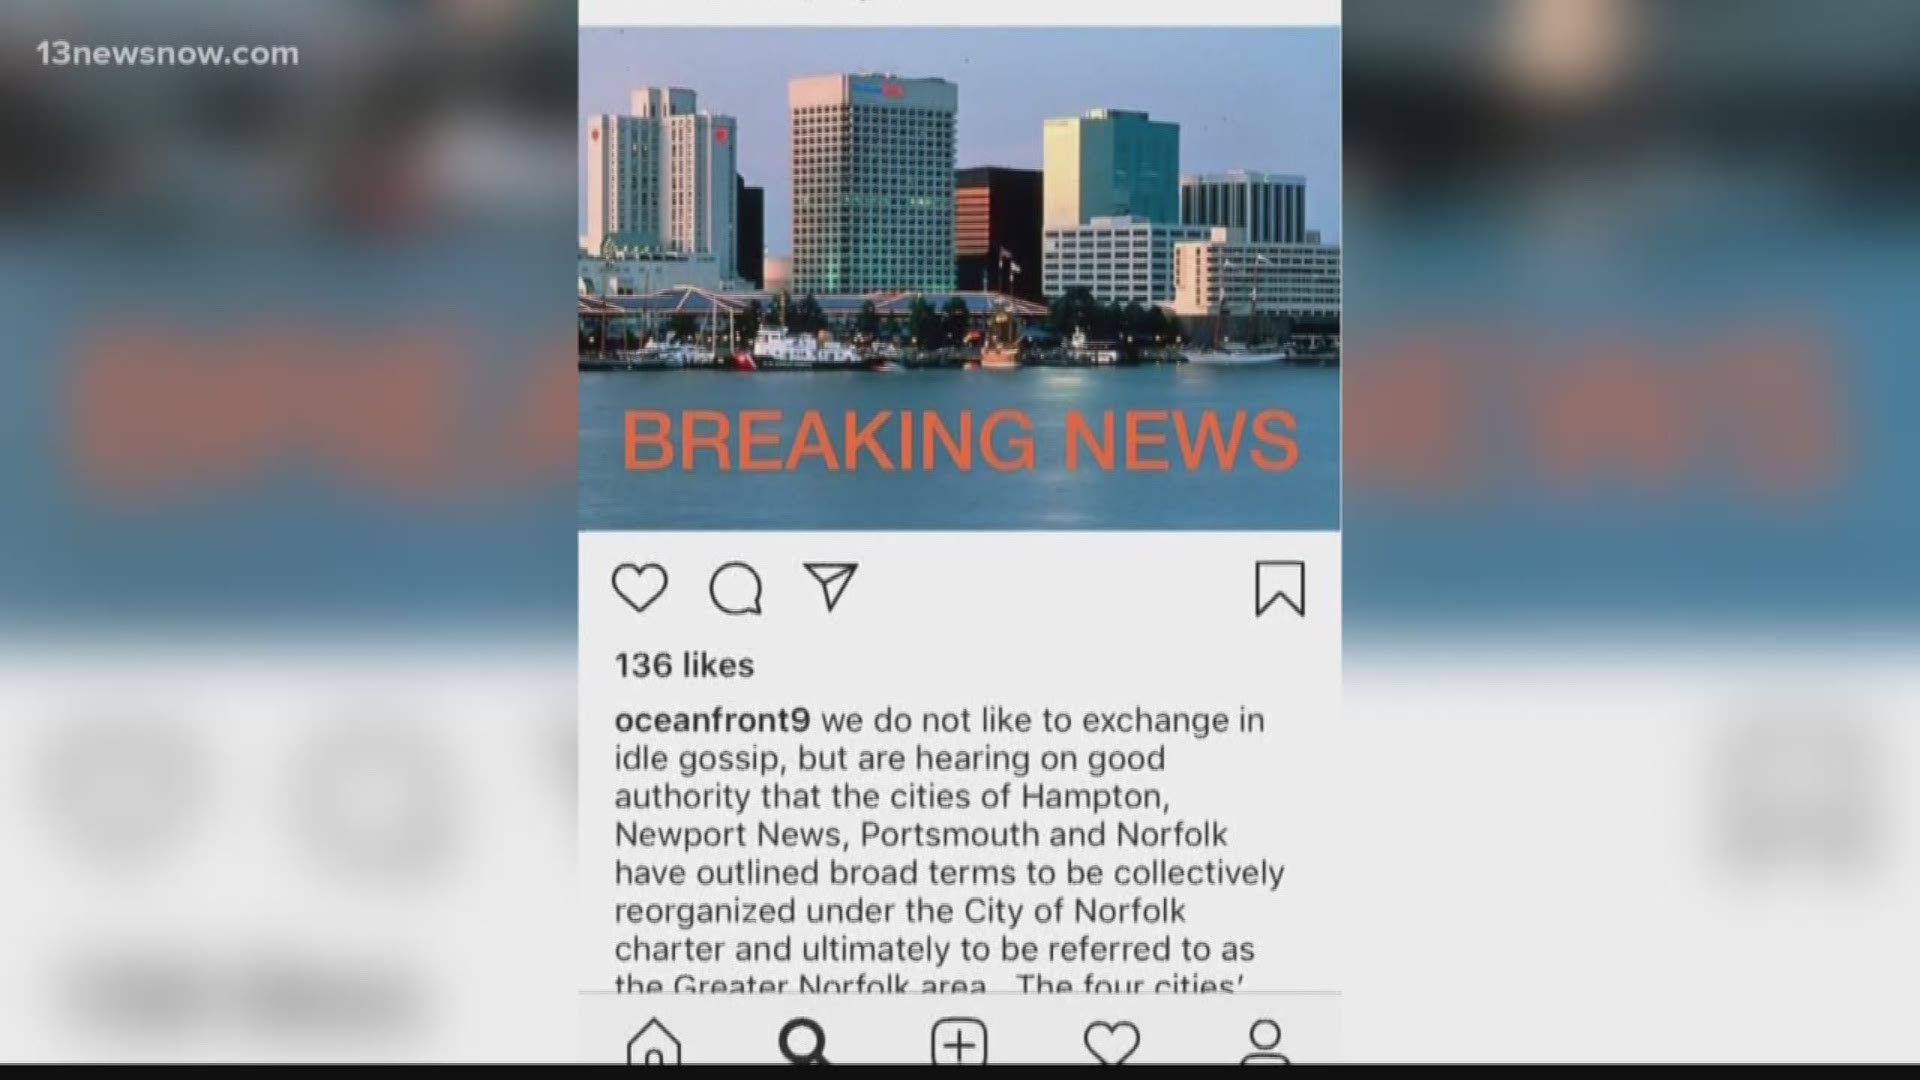 Oceanfront9 posted on instagram that the Hampton Roads area may start going by a different name and our verify team looked into the claim.